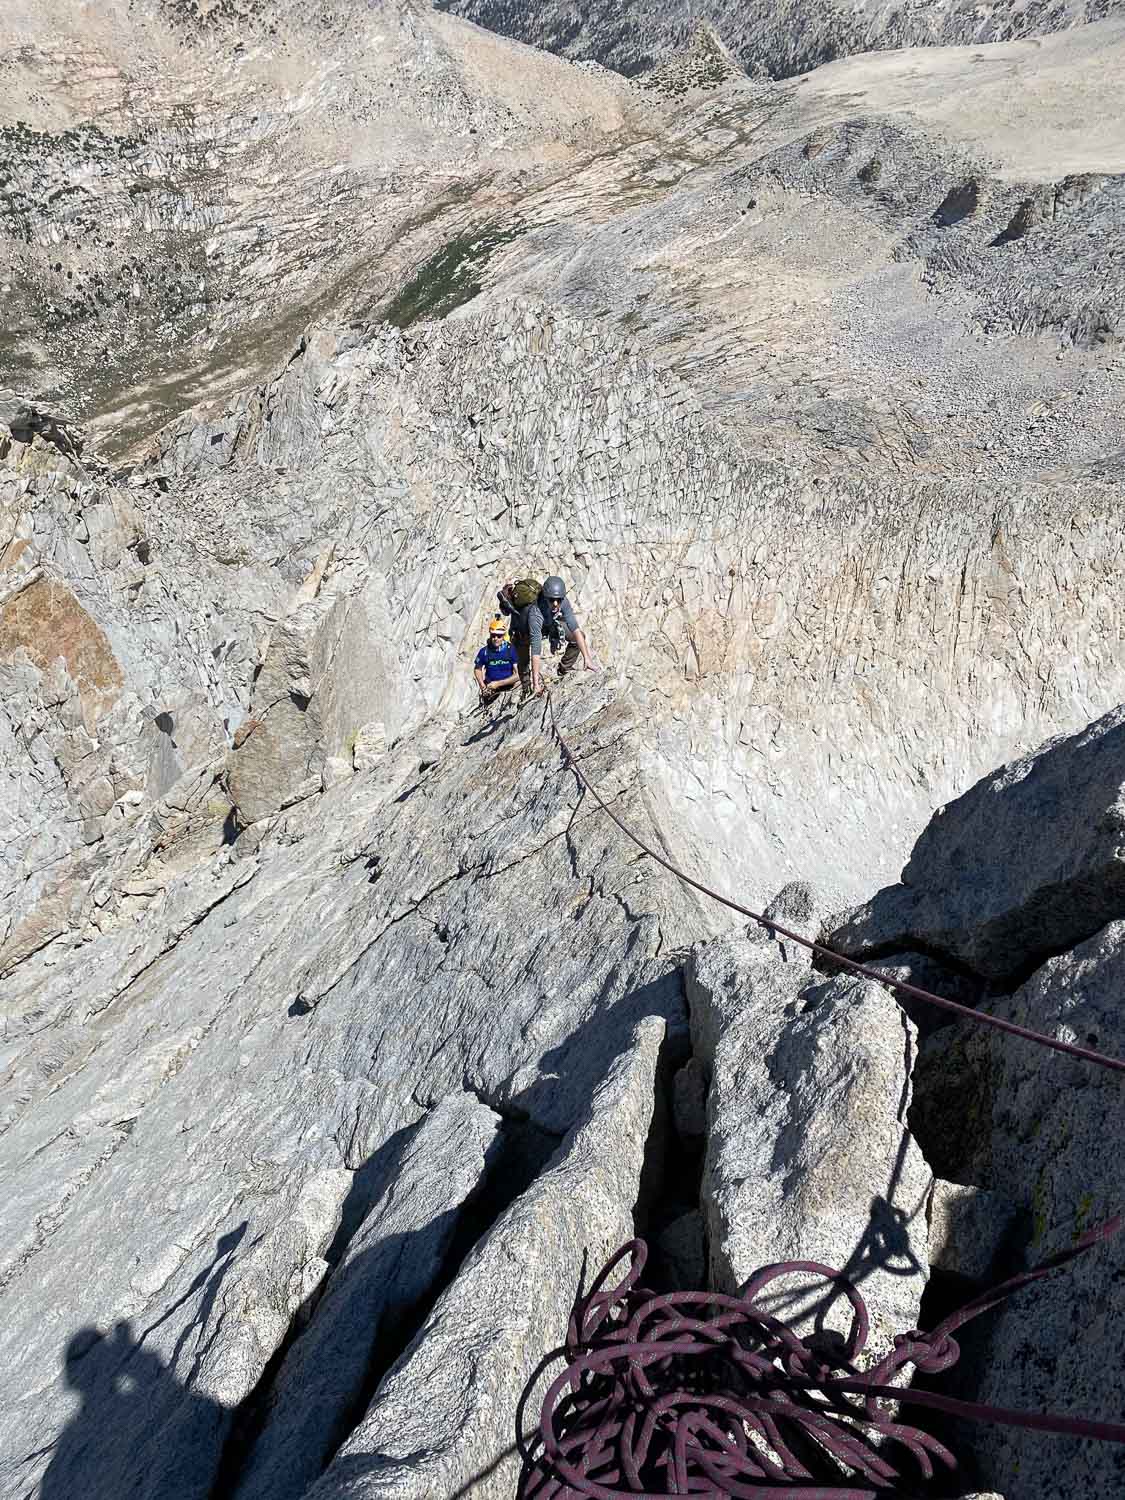 The final pitch on the North Ridge of Mount Conness